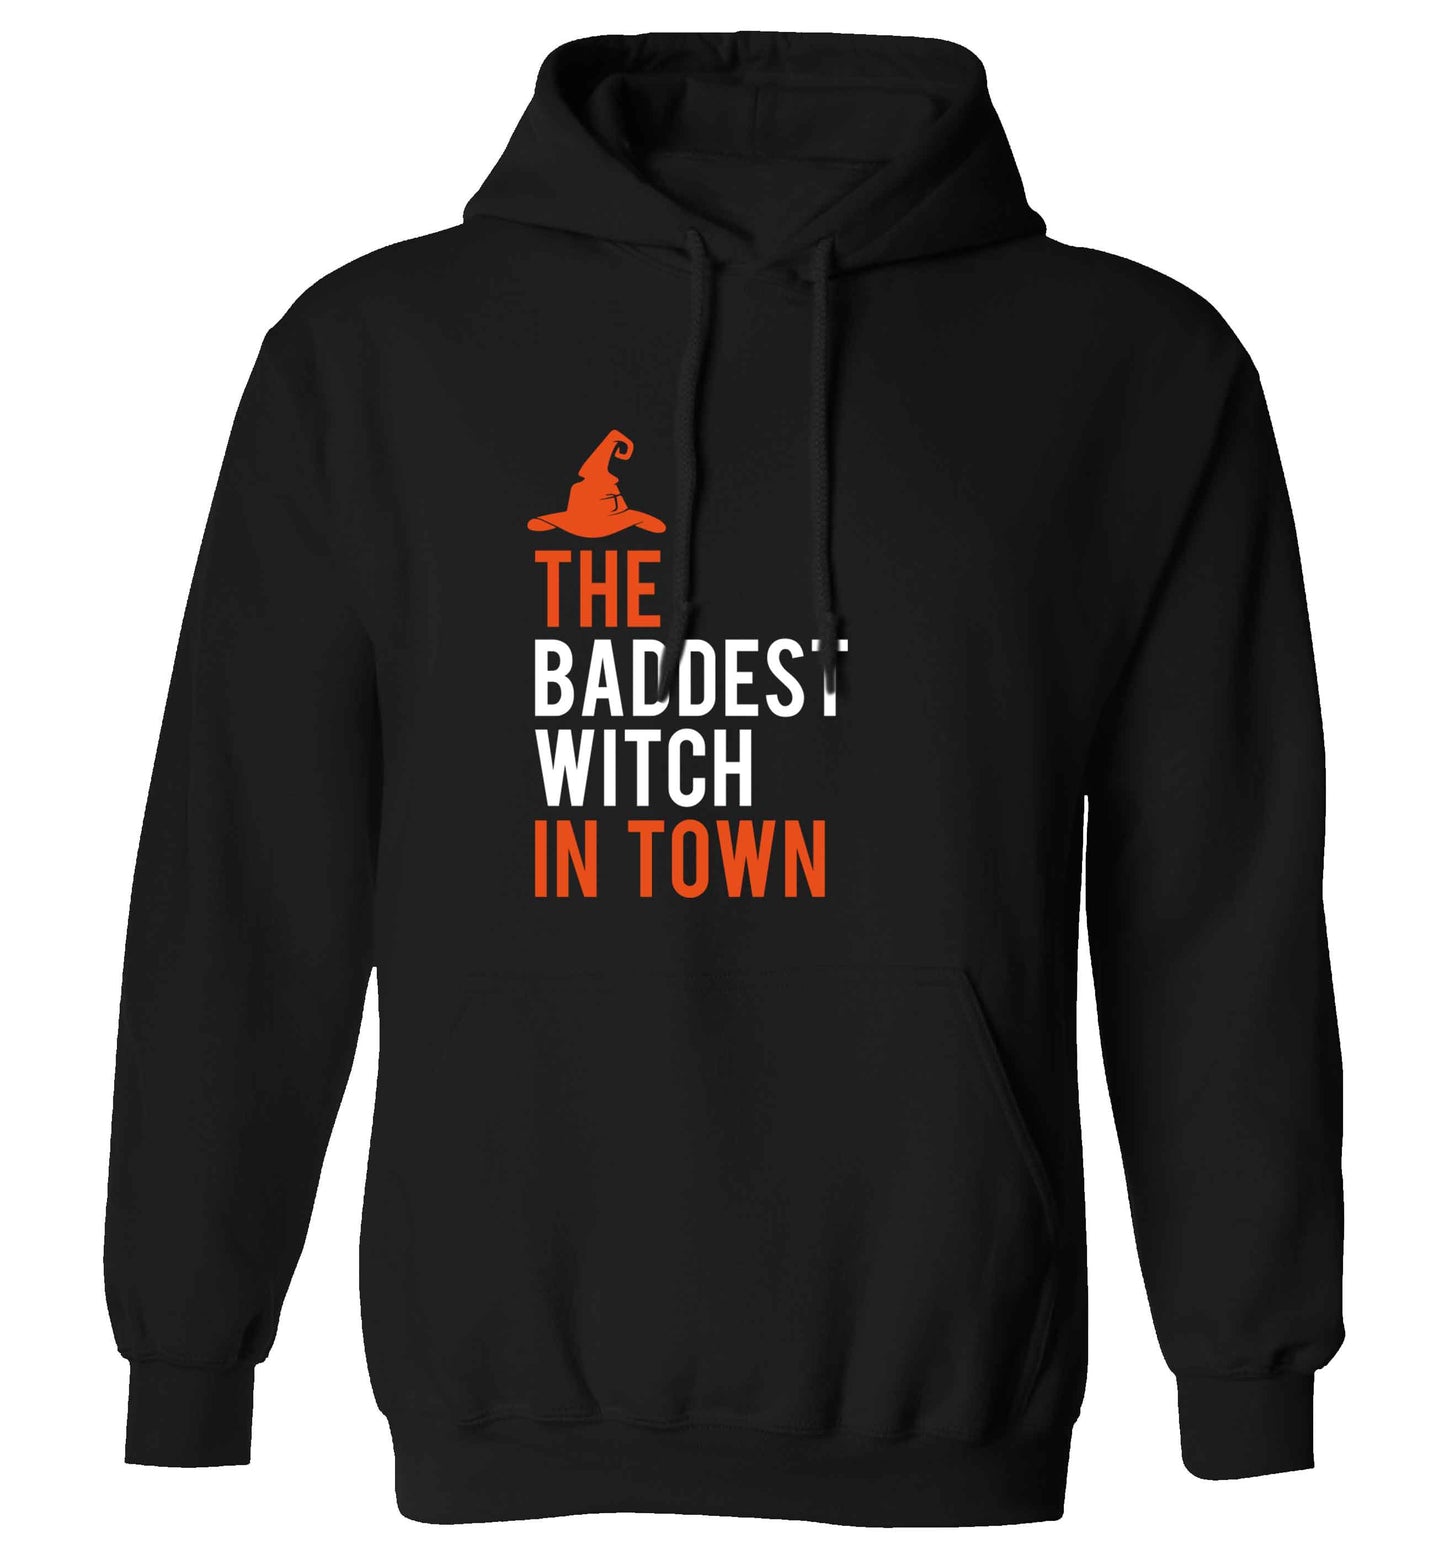 Badest witch in town adults unisex black hoodie 2XL